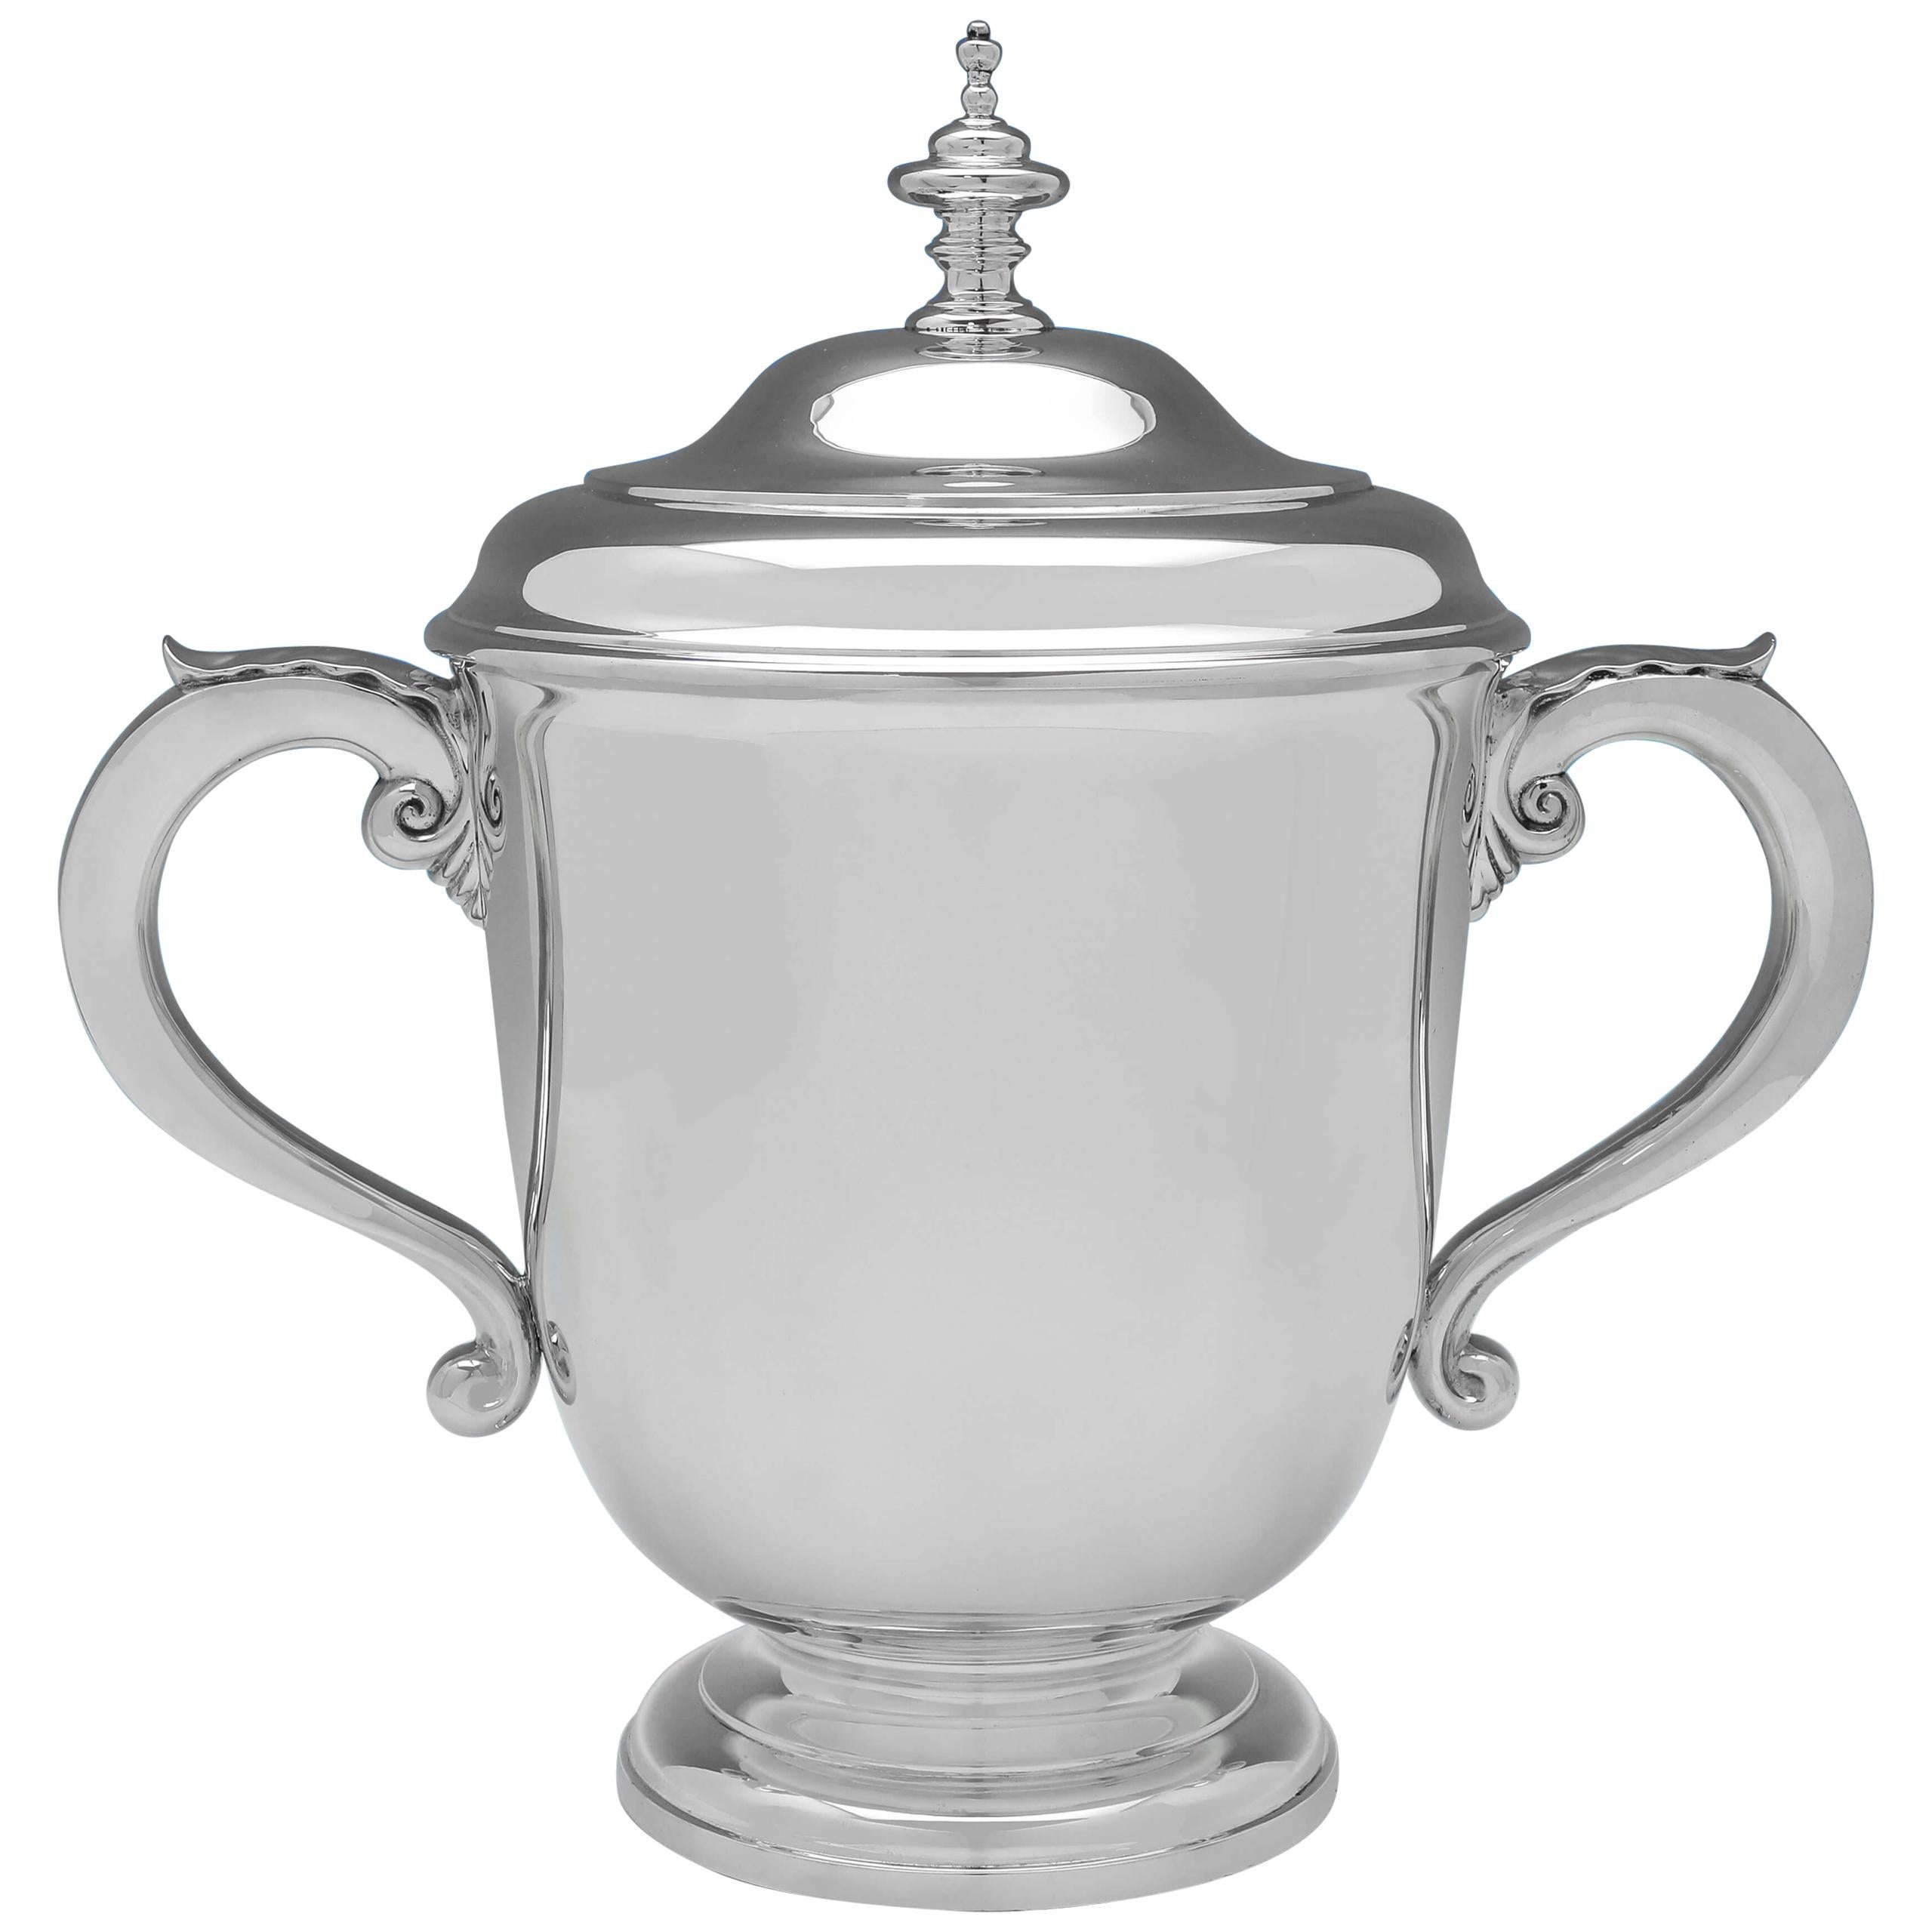 Large Sterling Silver Art Deco Trophy Made in 1935 by Mappin & Webb